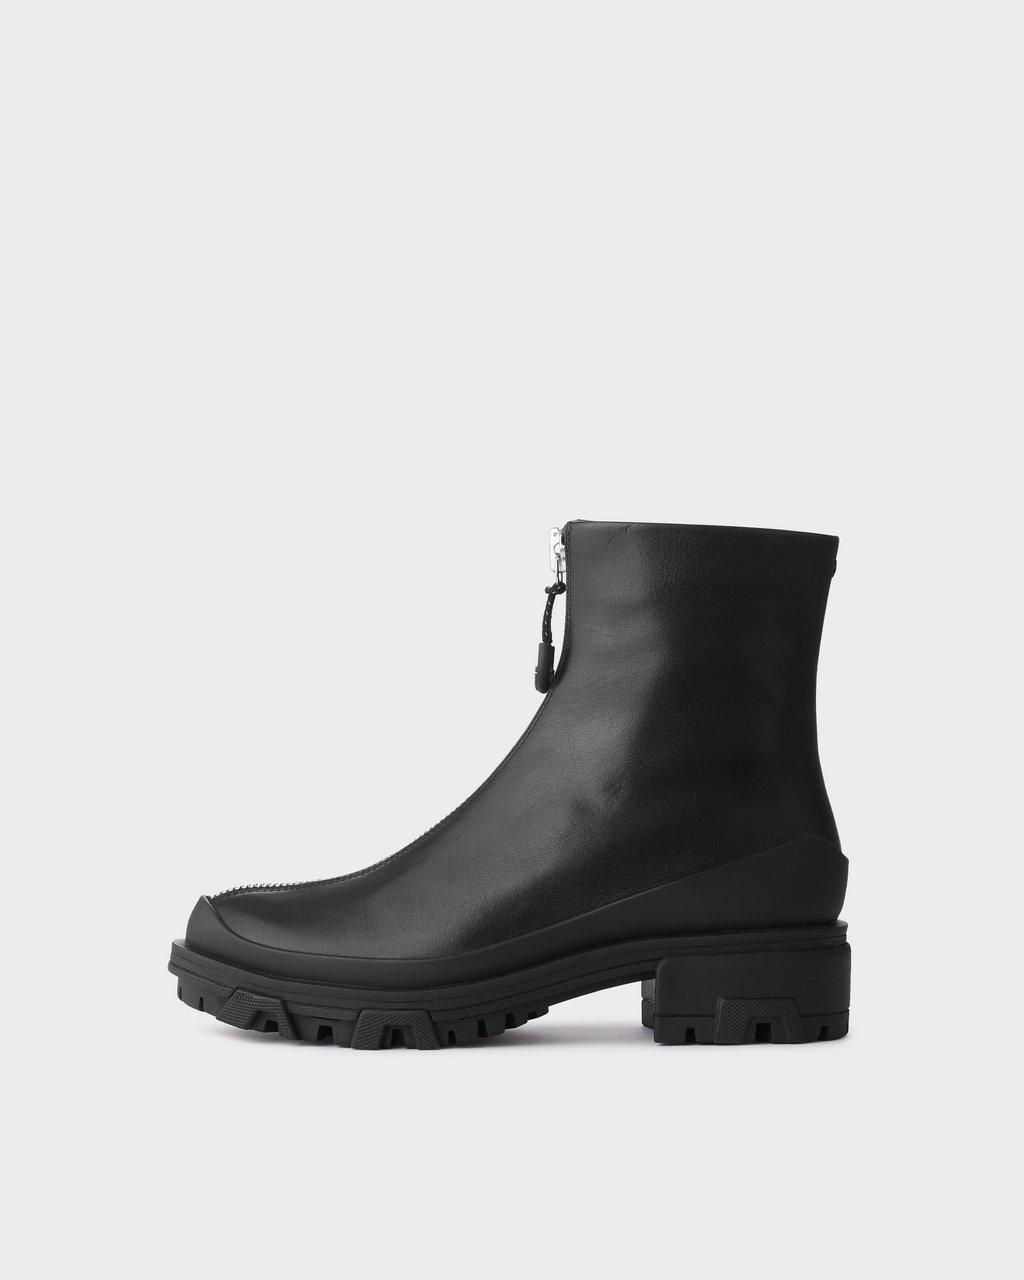 Shiloh Sport Zip Boot - Leather